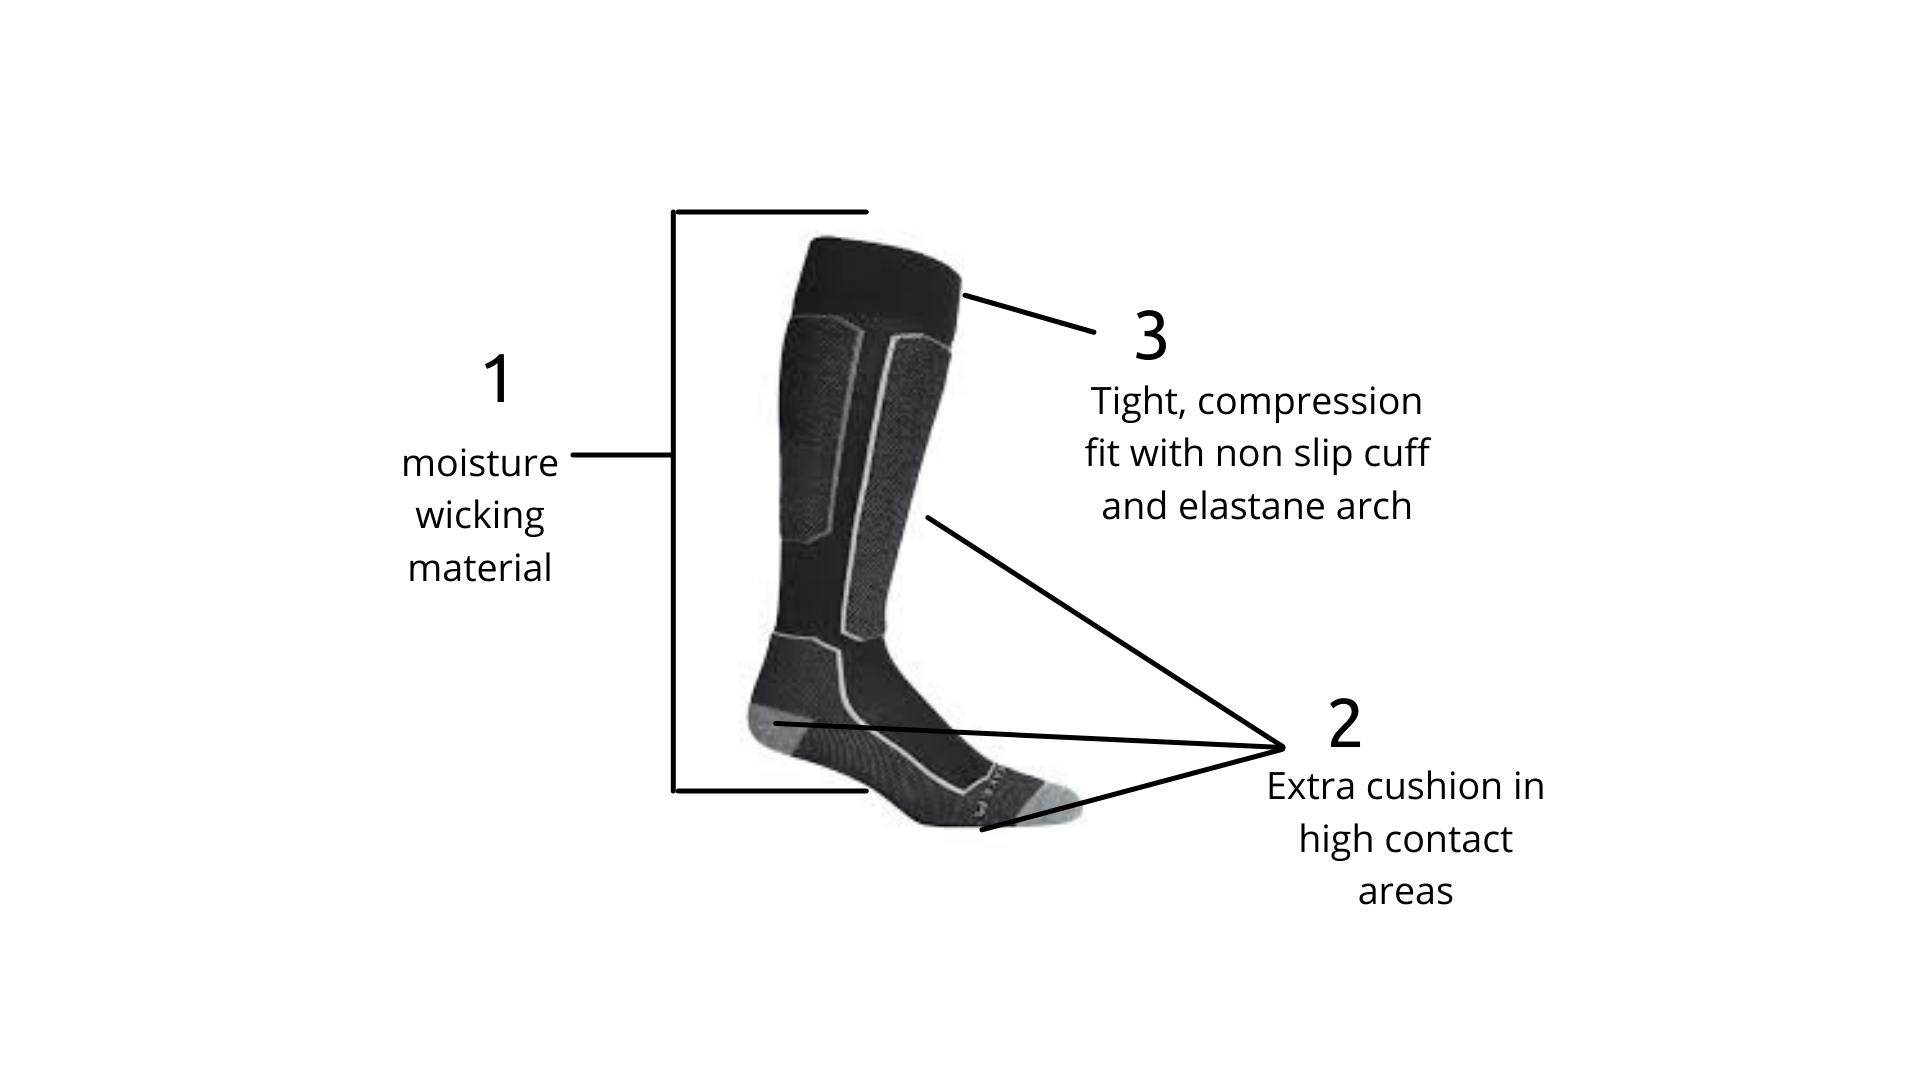 Diagram of a sock with three arrows pointing to the three main features that make ski socks different from regular socks. First arrow pointing to the  entire sock with the words "moisture wicking material". Second arrow pointing to the shin and heel and toe with the words "extra cushion in high contact areas". Third arrow is pointing to the top of the sock with the words "tight, compression fit with non slip cuff an elastane arch".